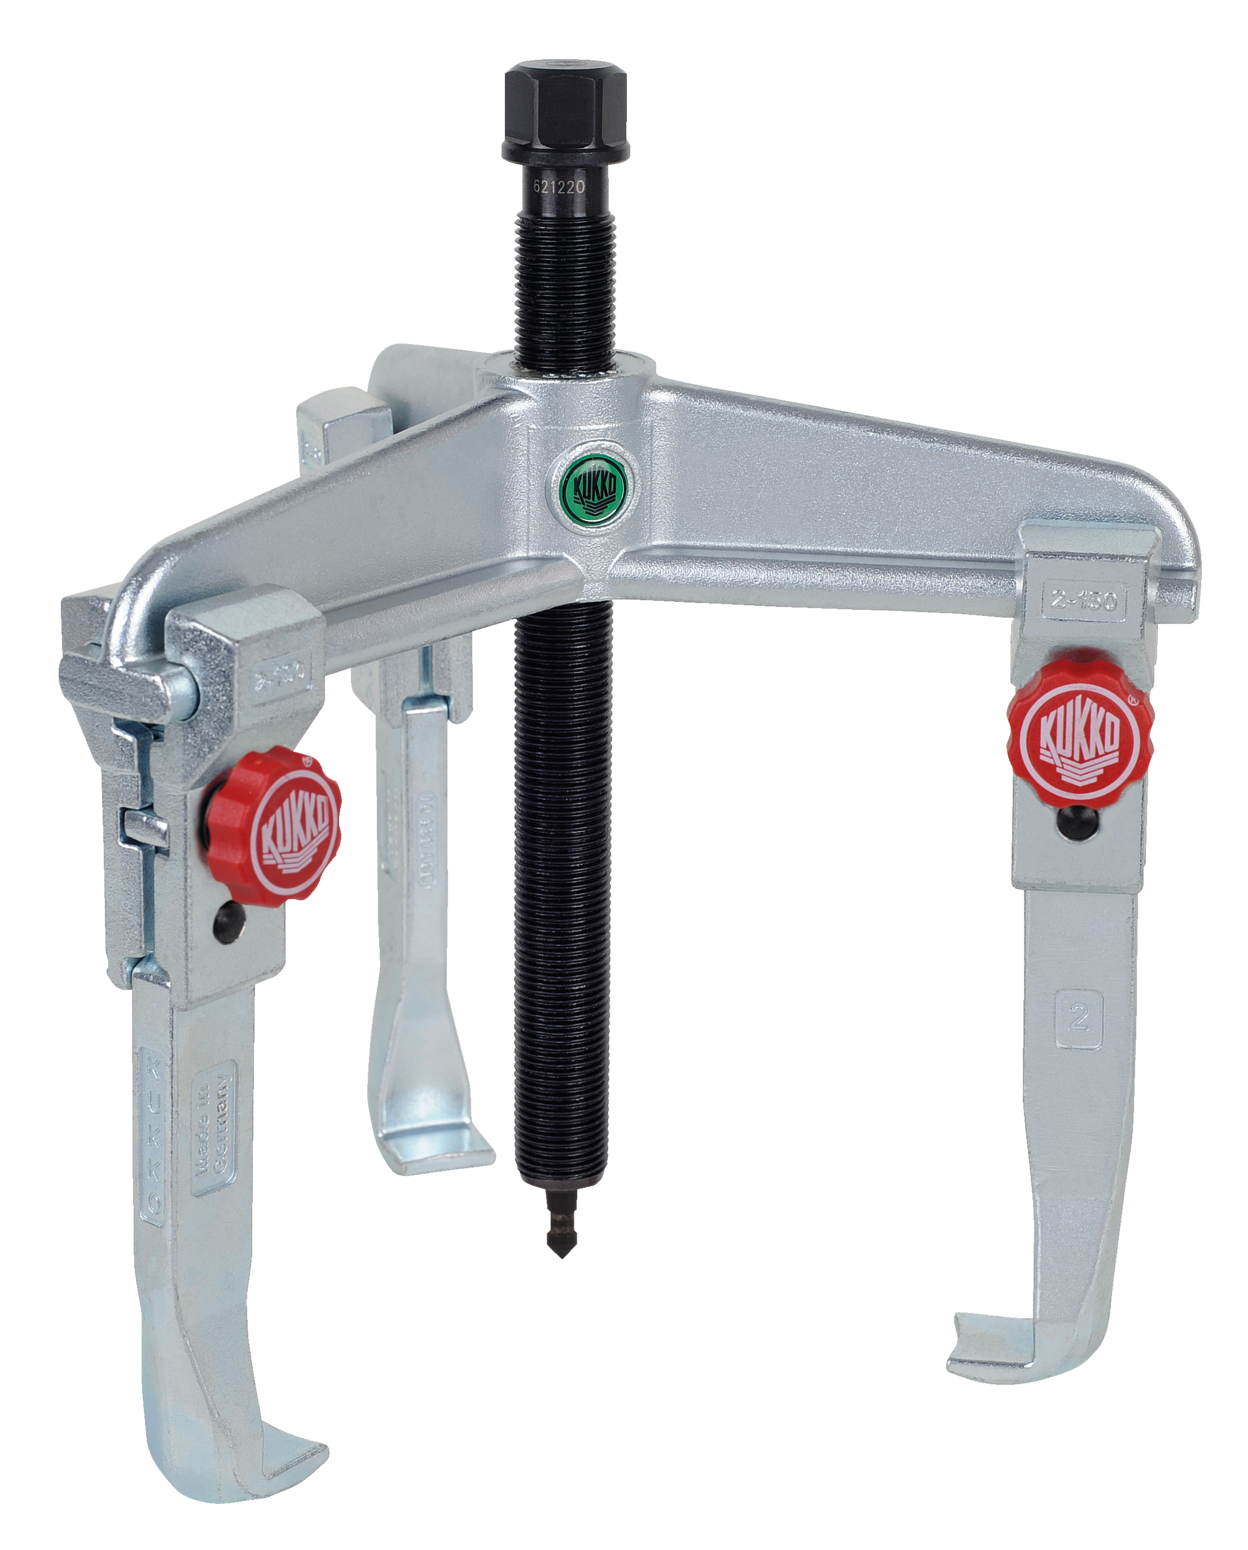 A 3-arm universal puller of the 30+ series with quick-adjustable puller hooks for pulling off bearings, gears and pulleys